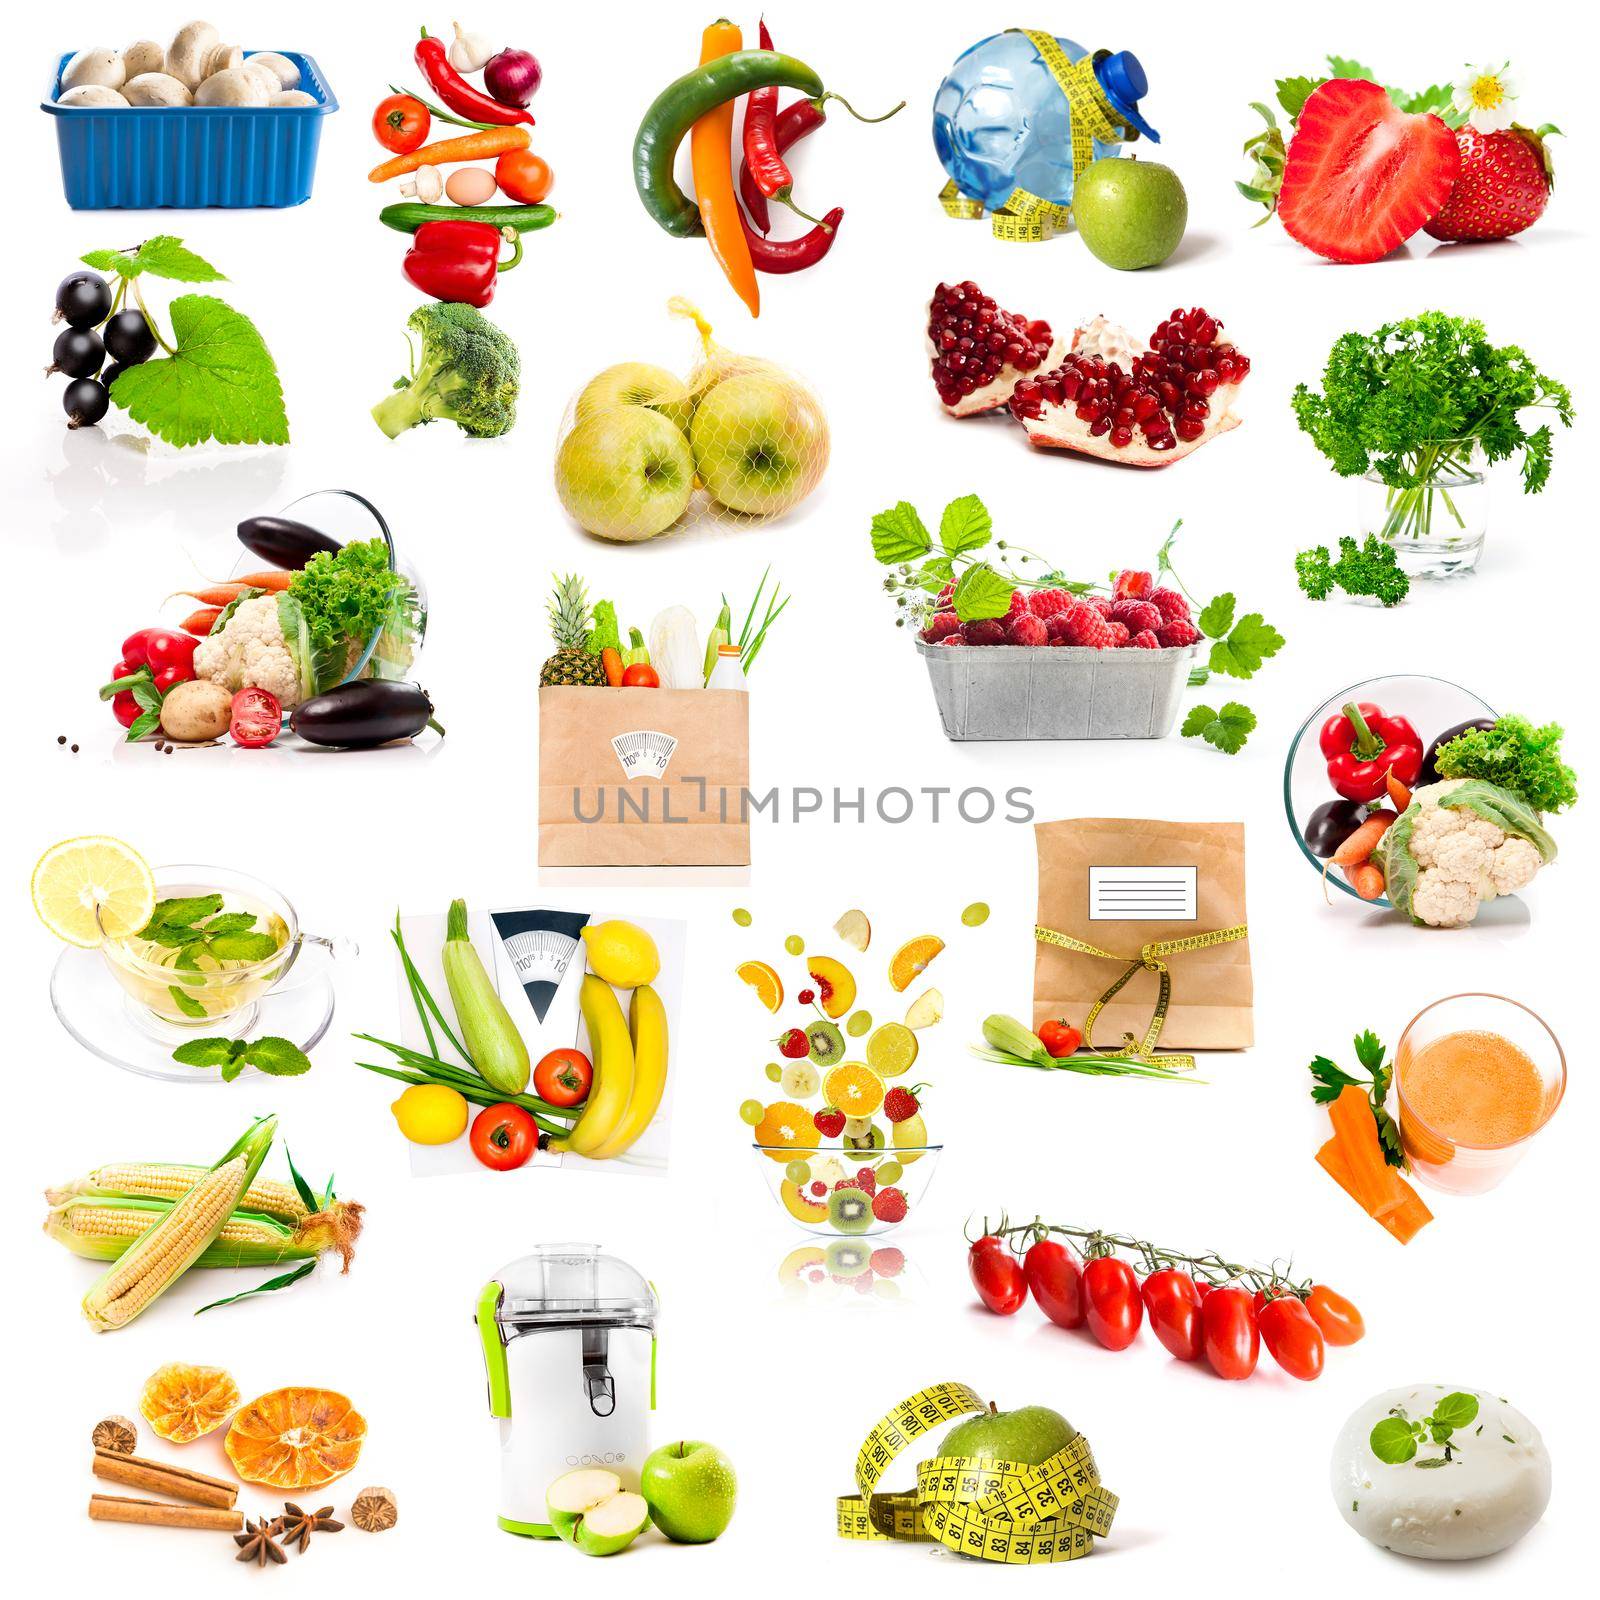 fruits and vegetables collage by tan4ikk1